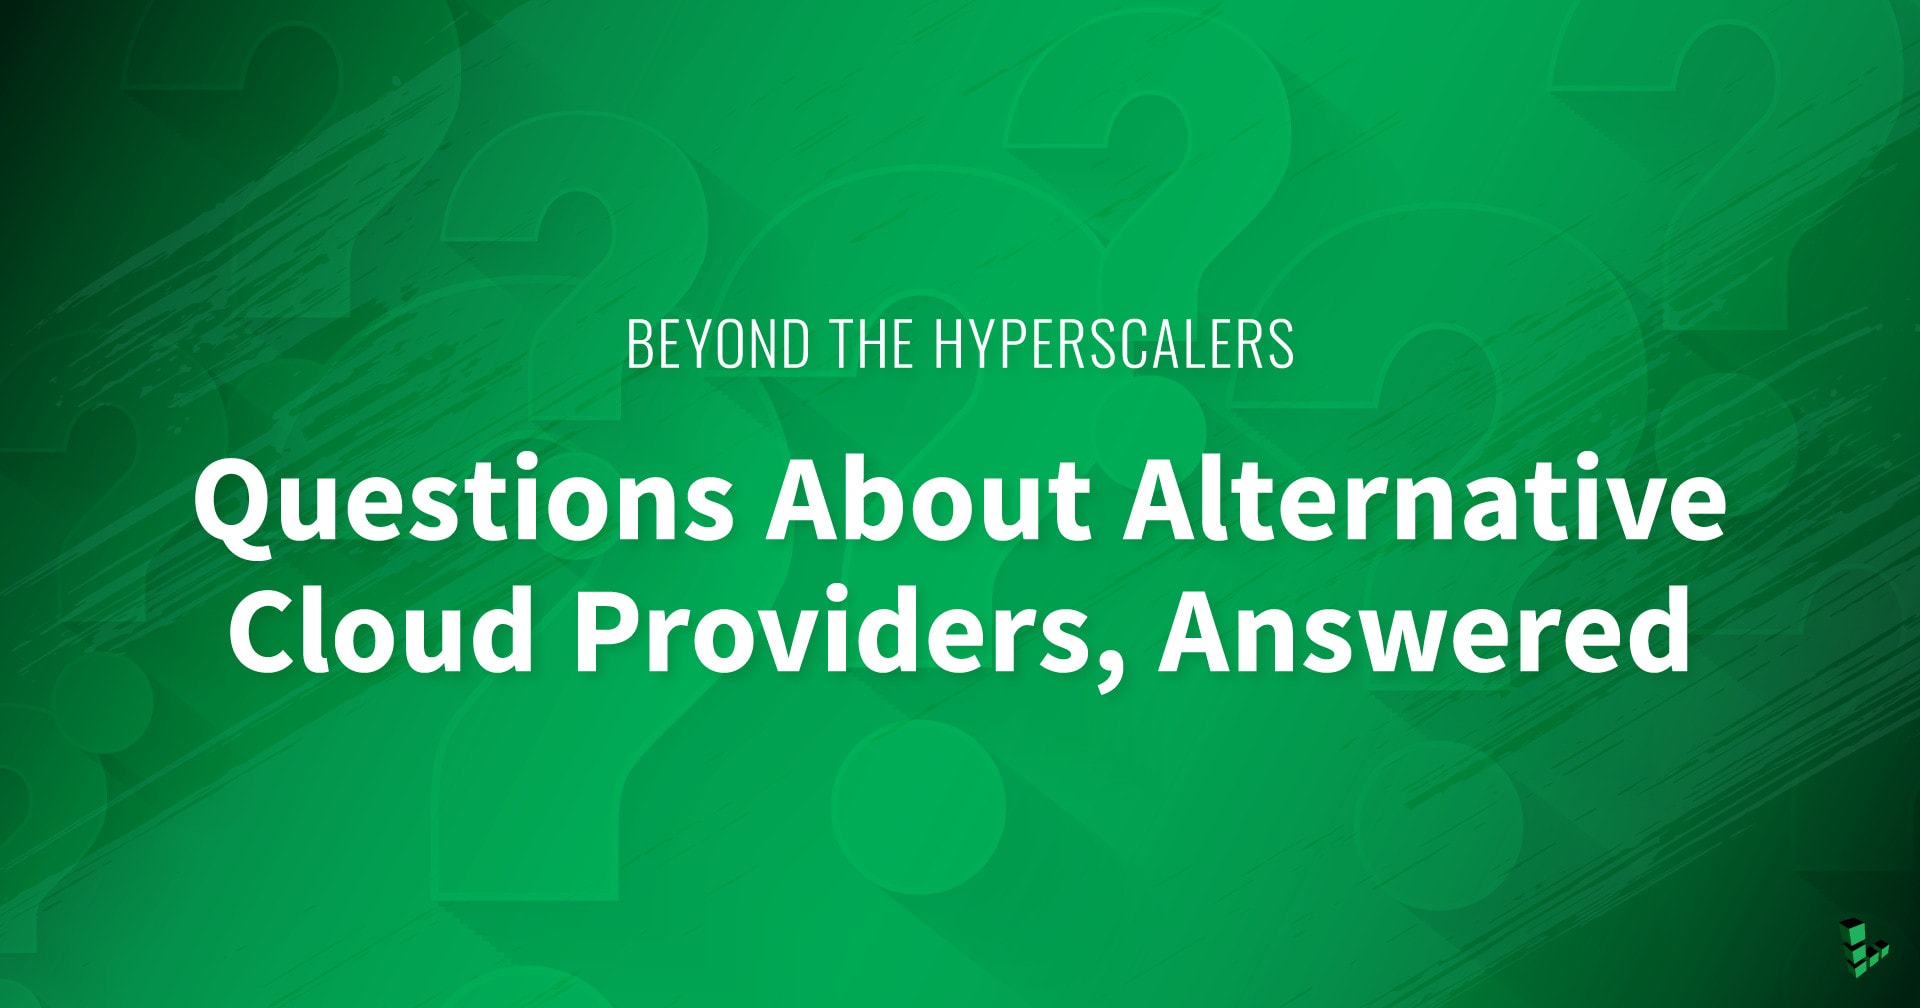 Beyond the Hyperscalers: Questions About Alternative Cloud Providers, Answered